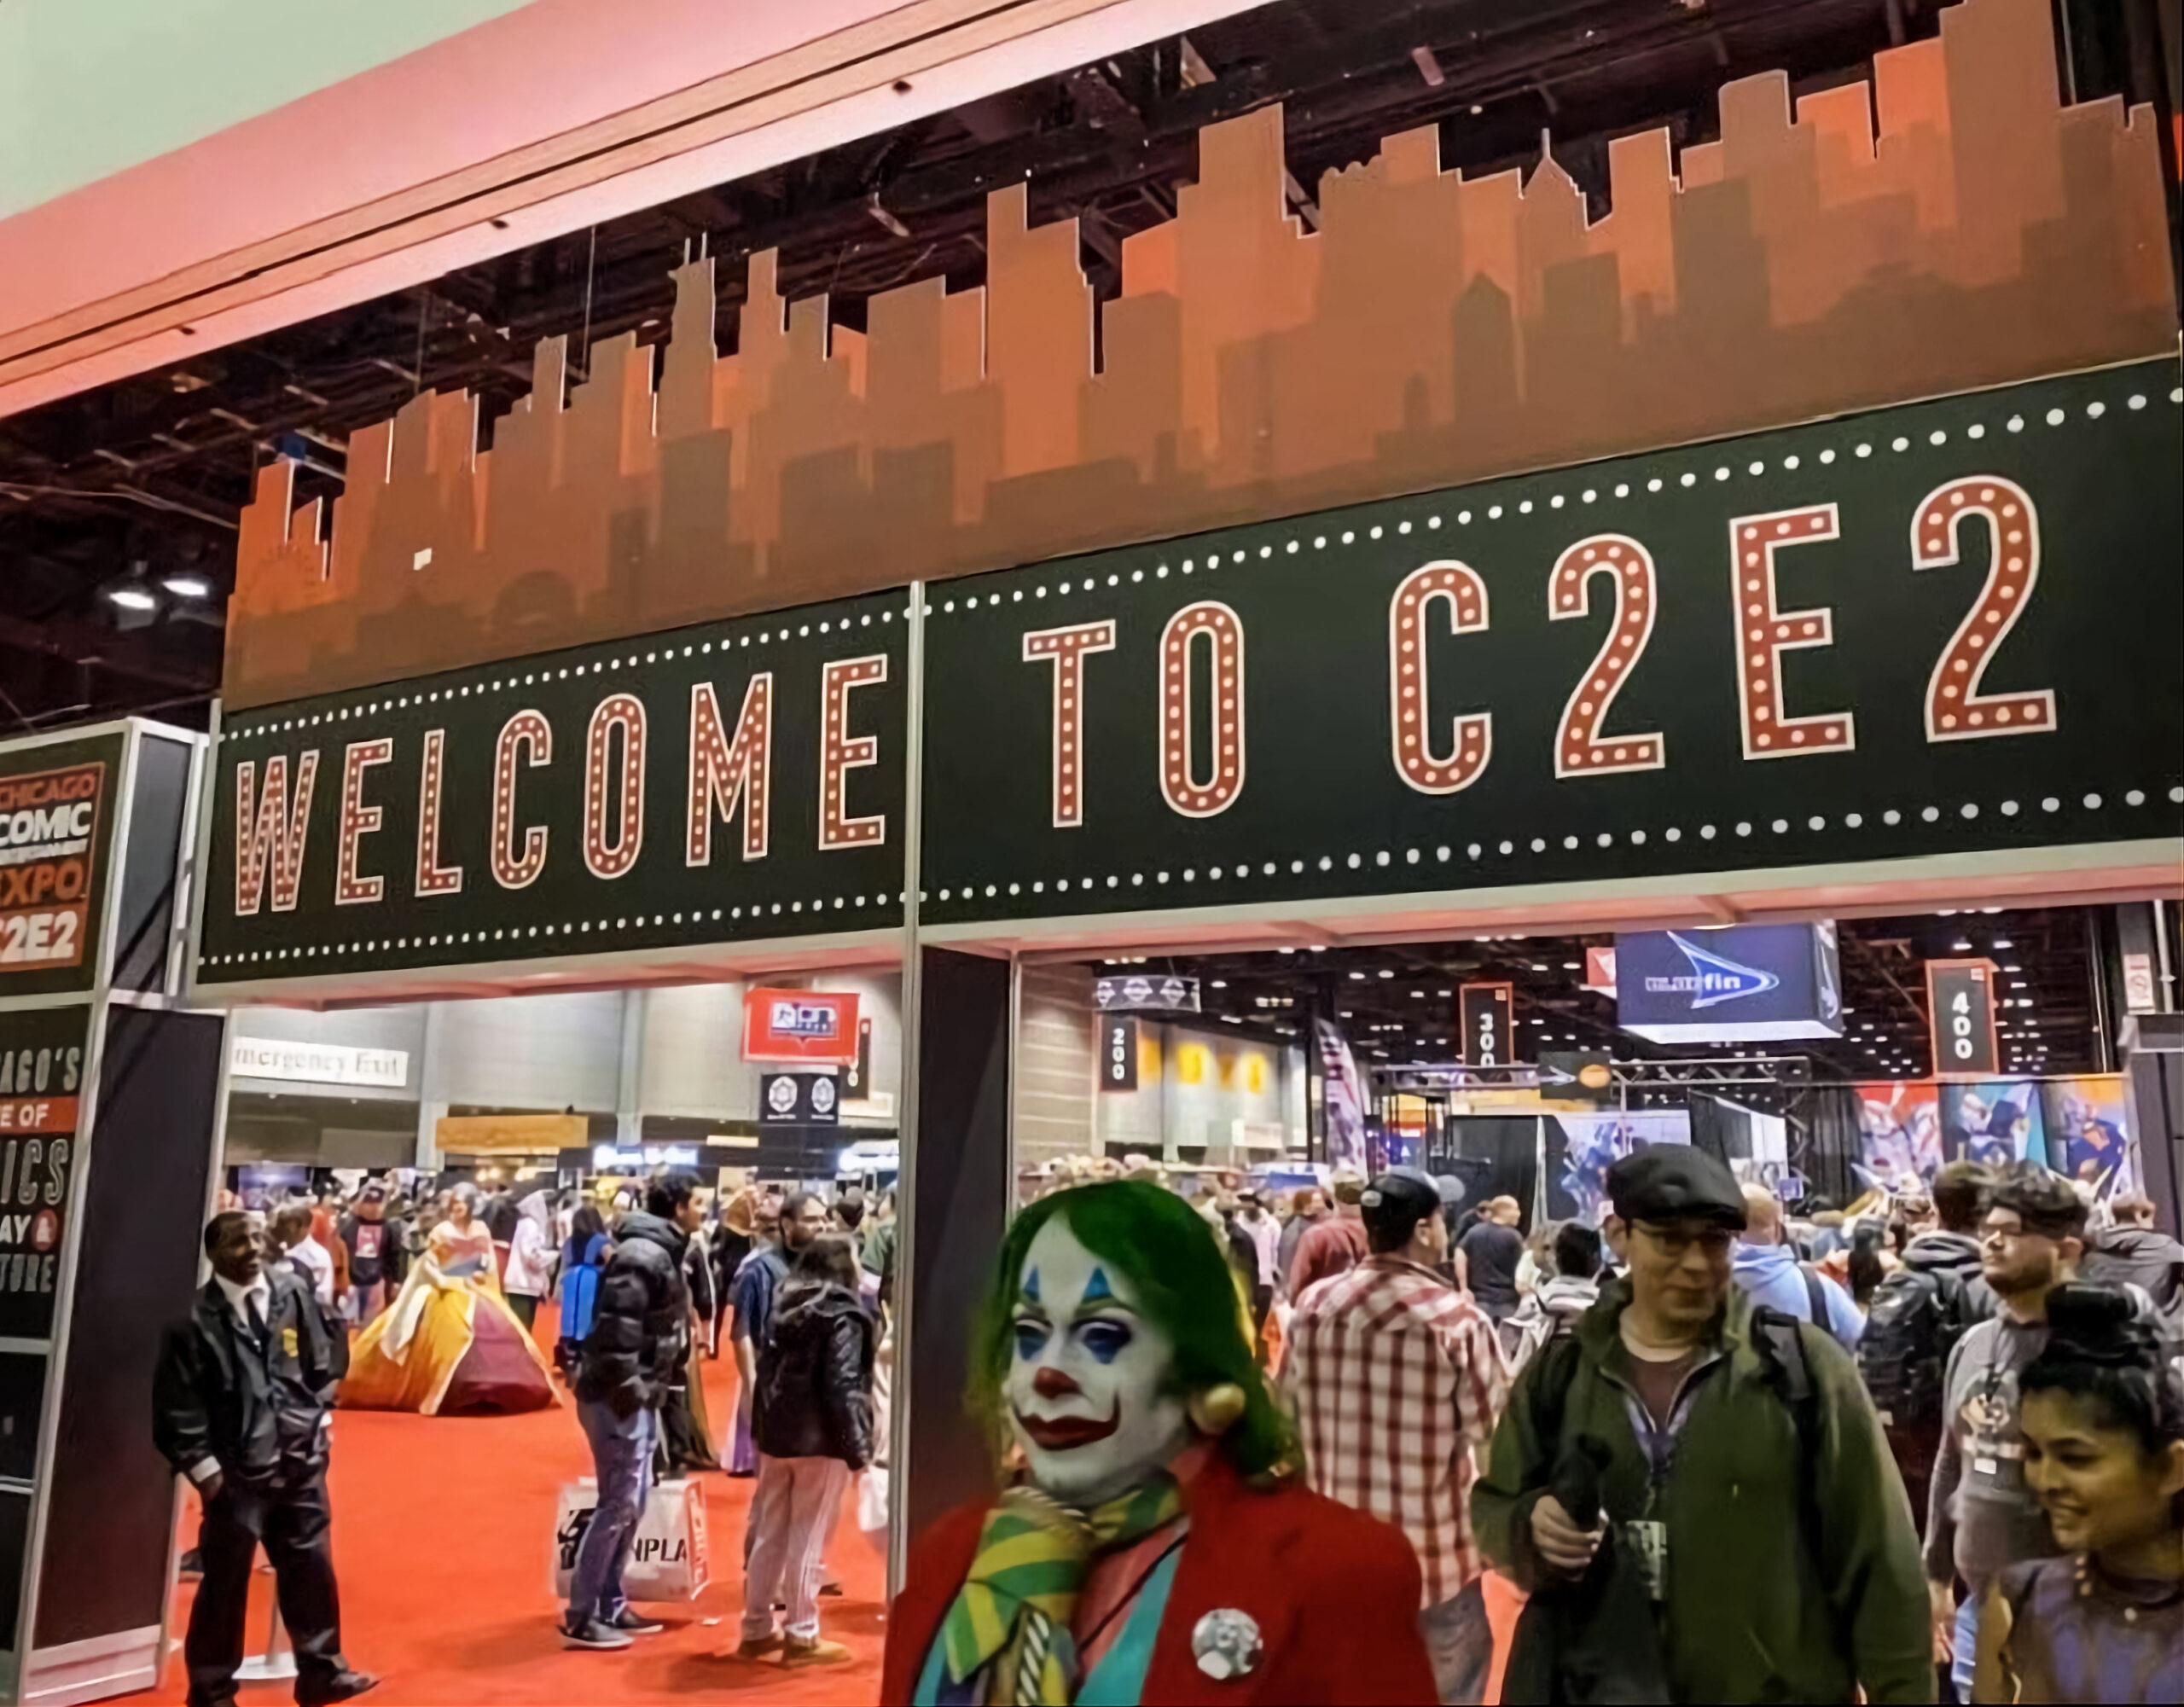 The C2E2 sign is above a crowd of people entering and exiting the event space.